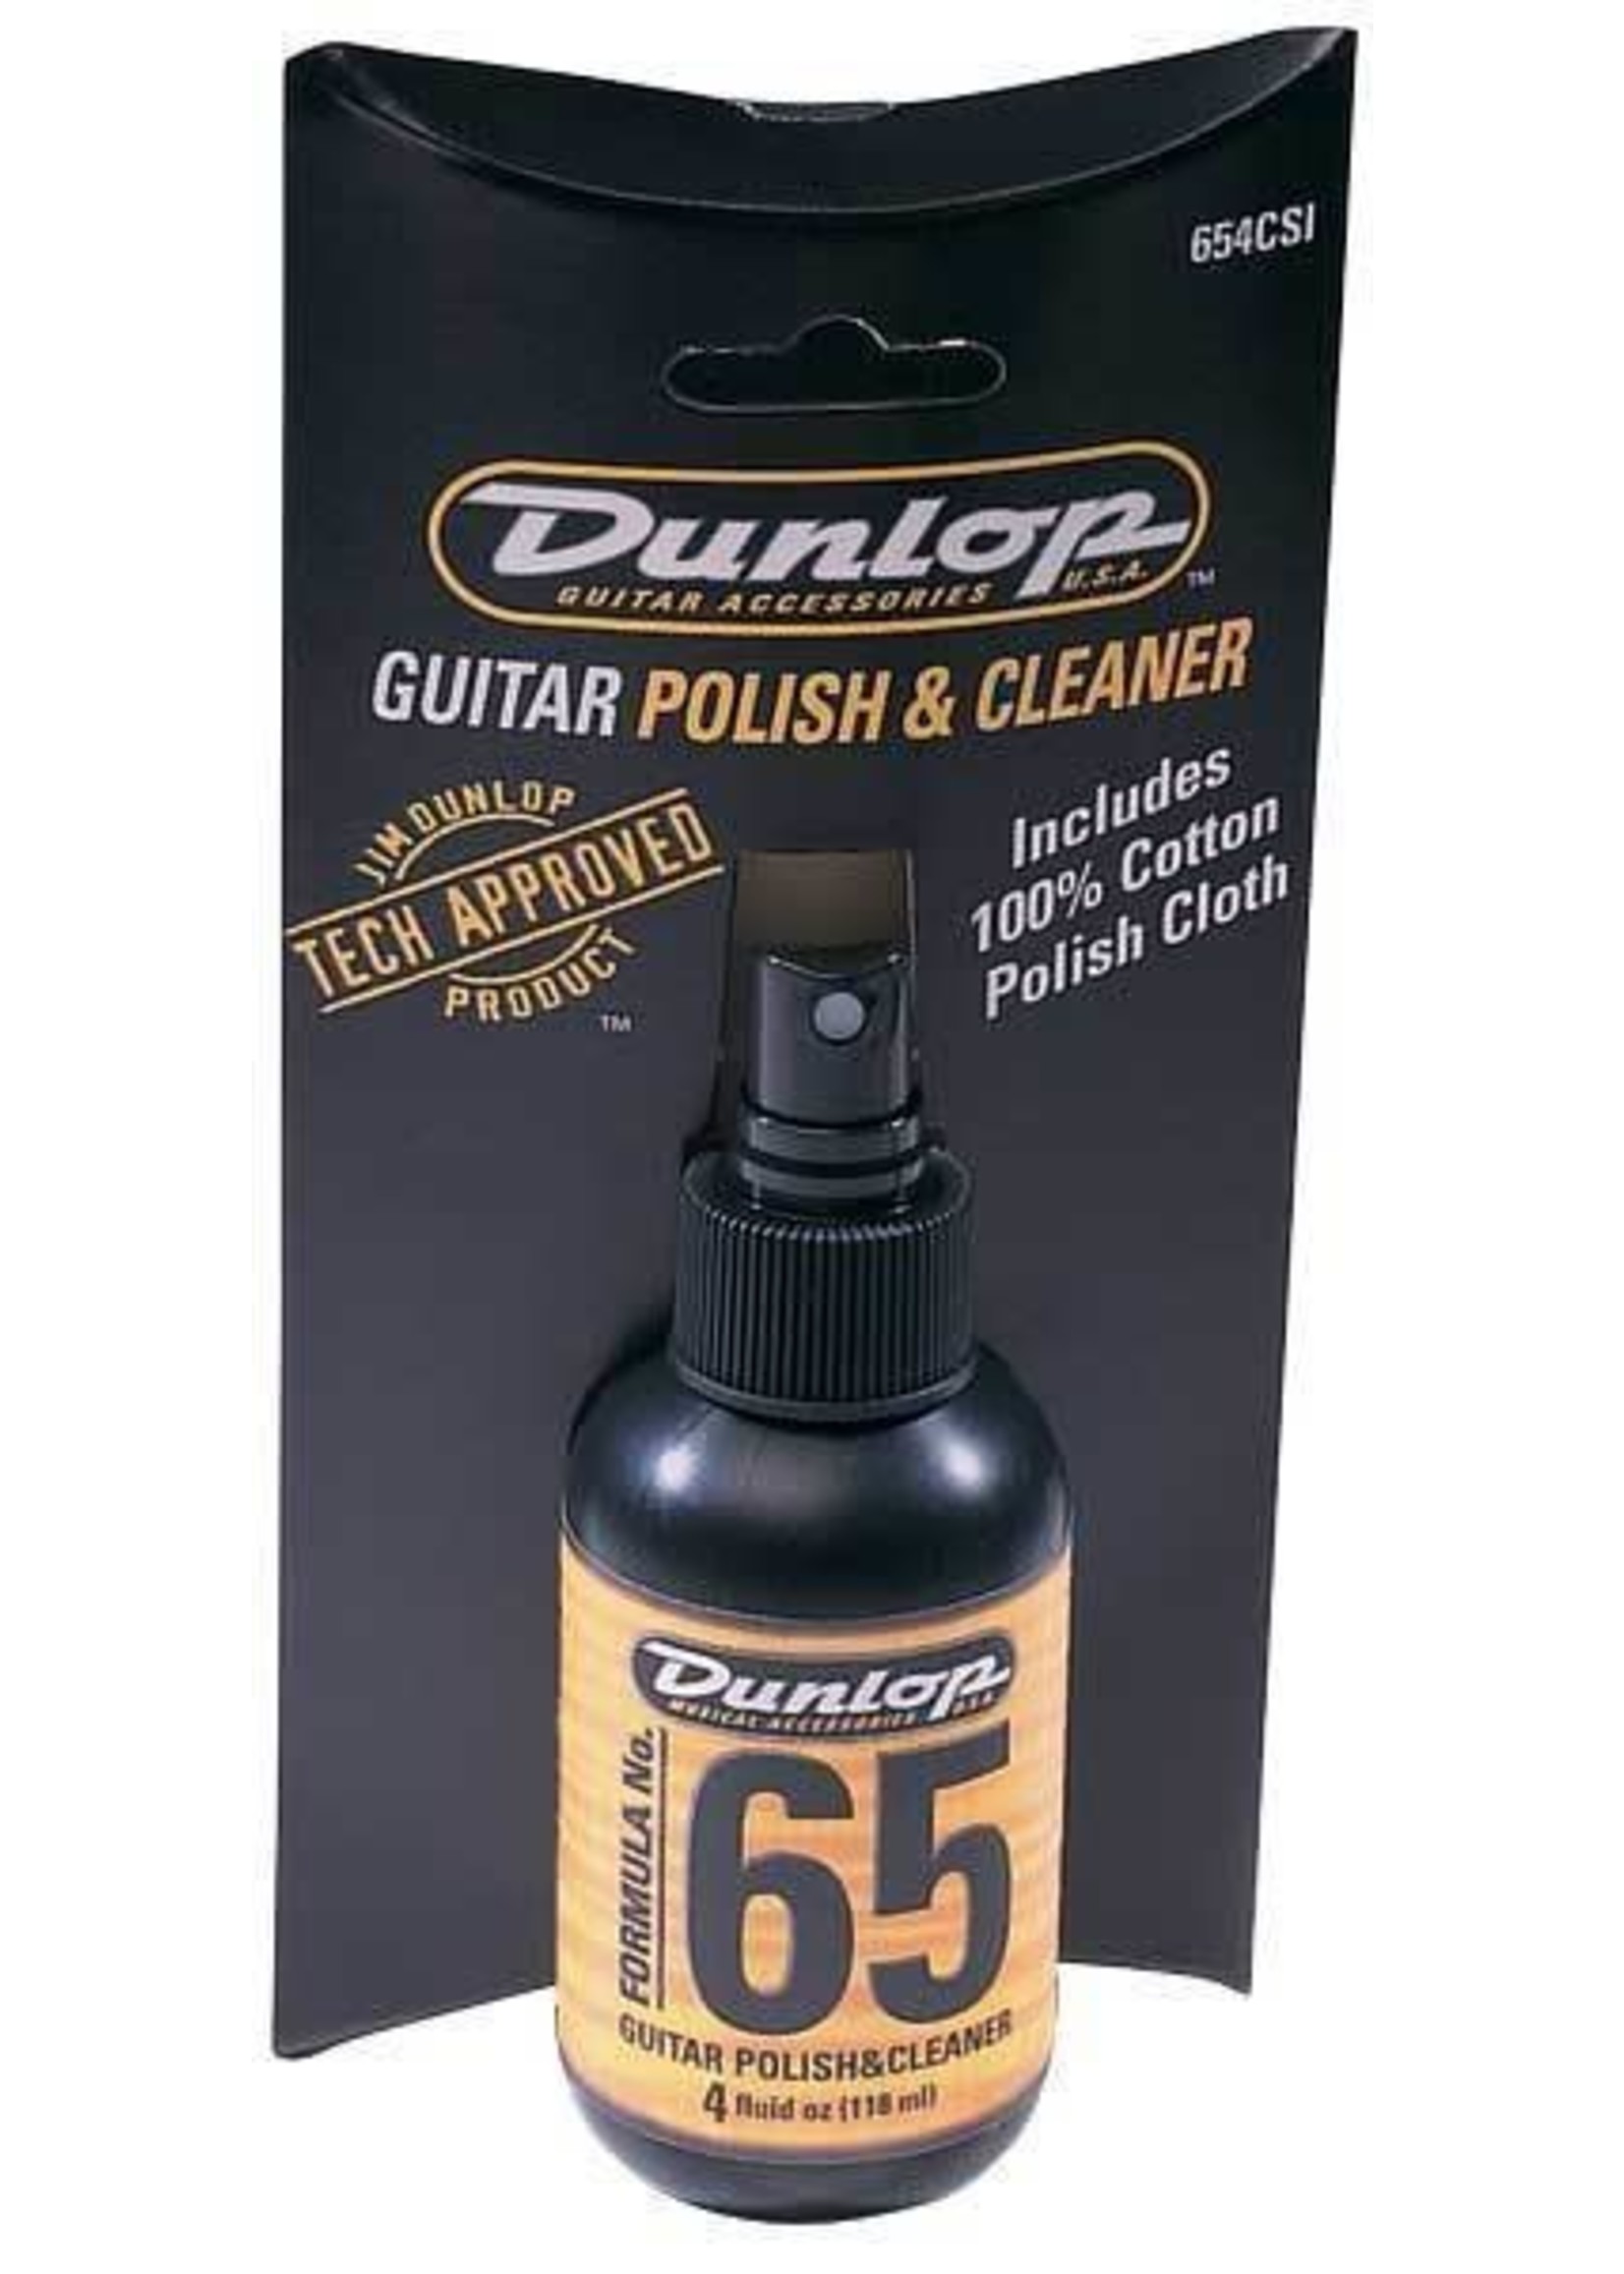 Dunlop Dunlop Polish & Cleaner with Cloth JD654C